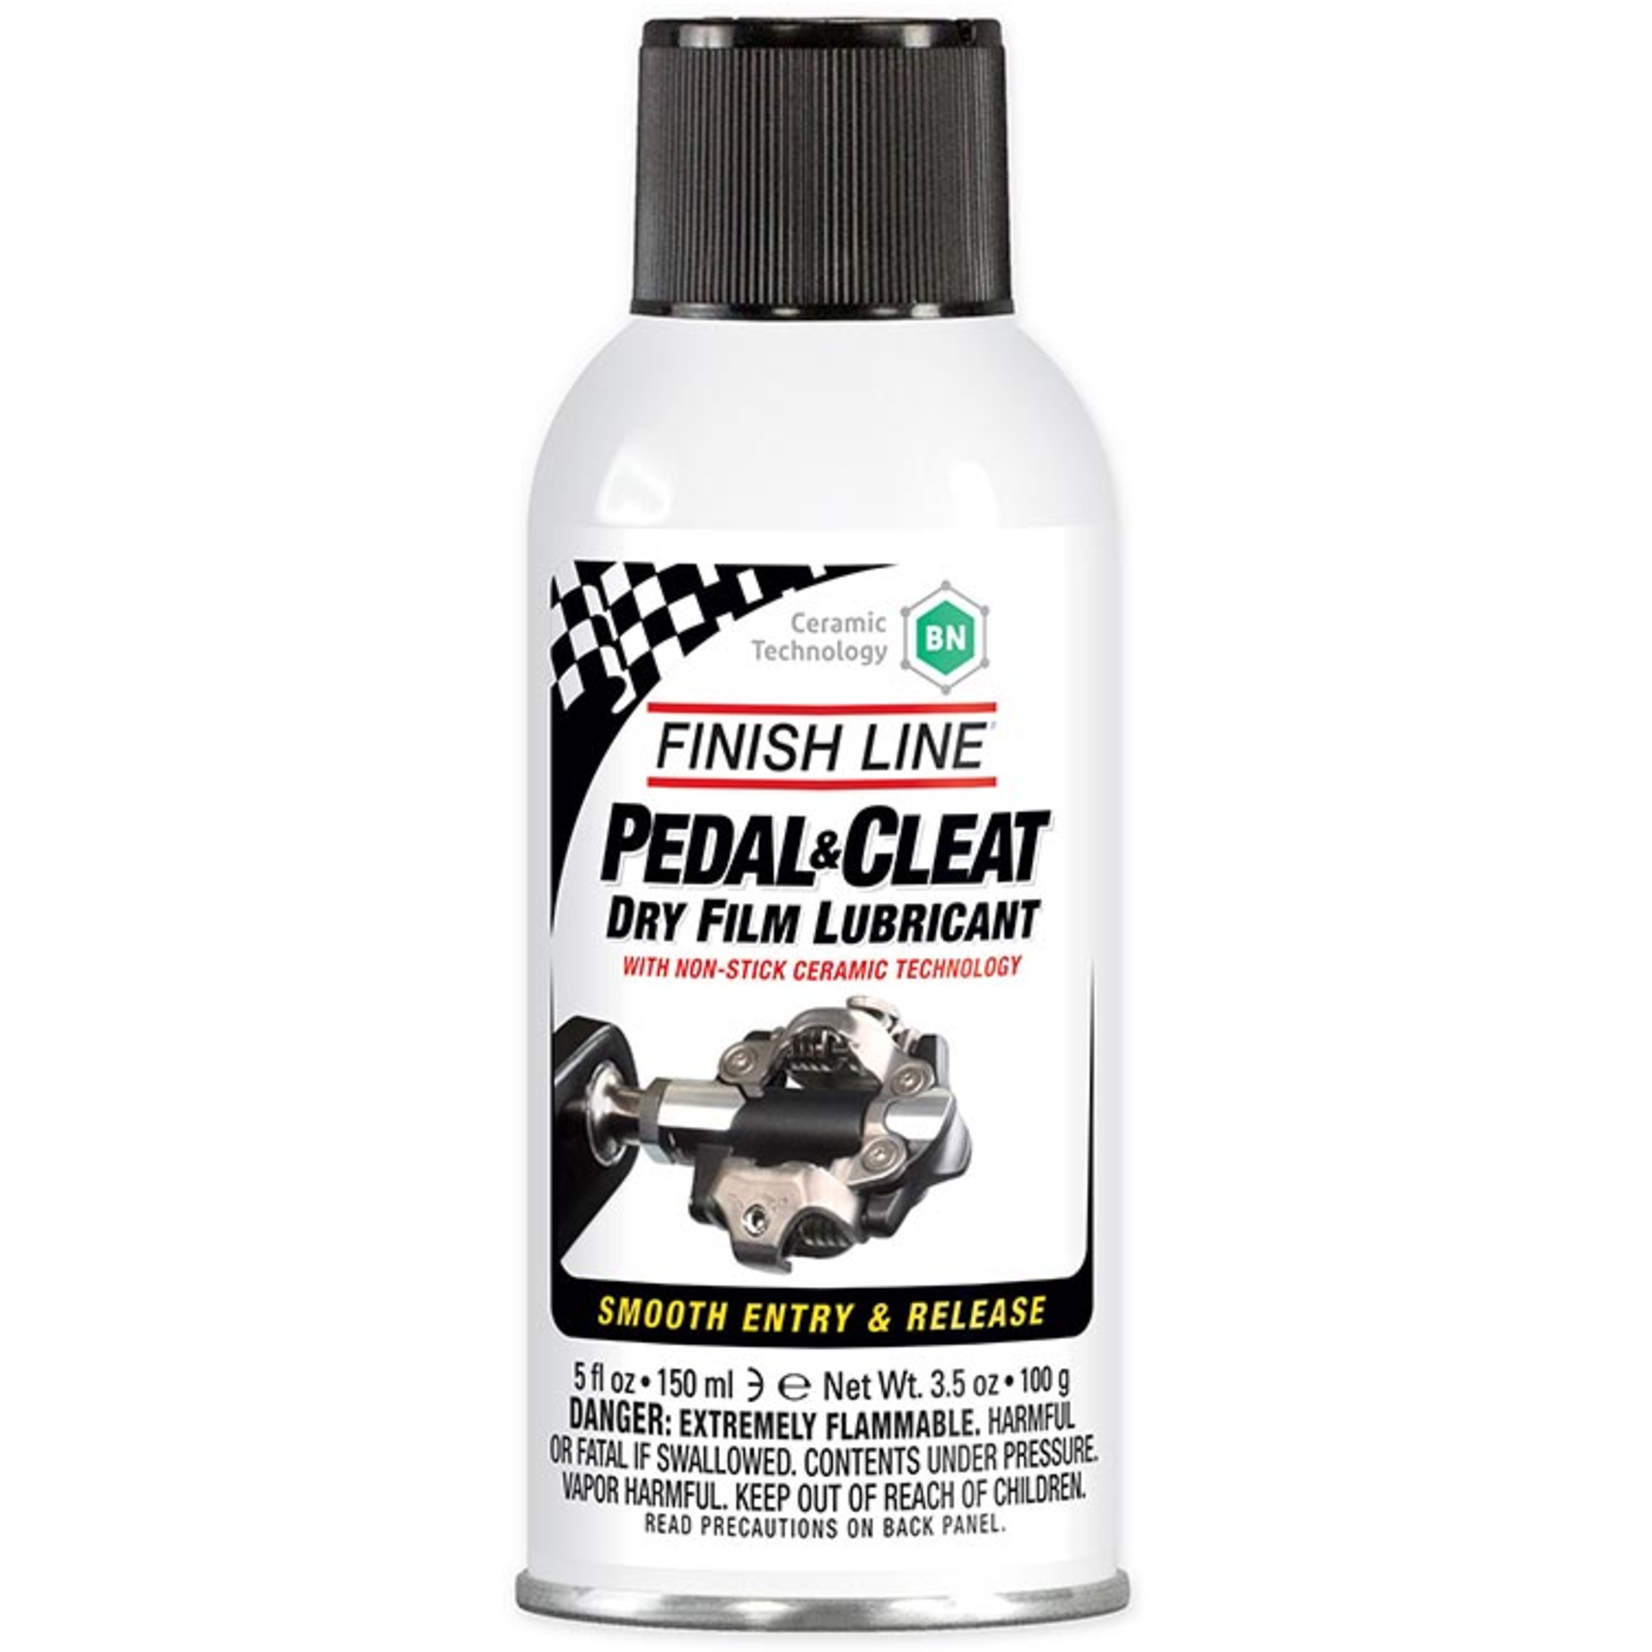 Finish Line Pedal and Cleat Dry Film Lubricant